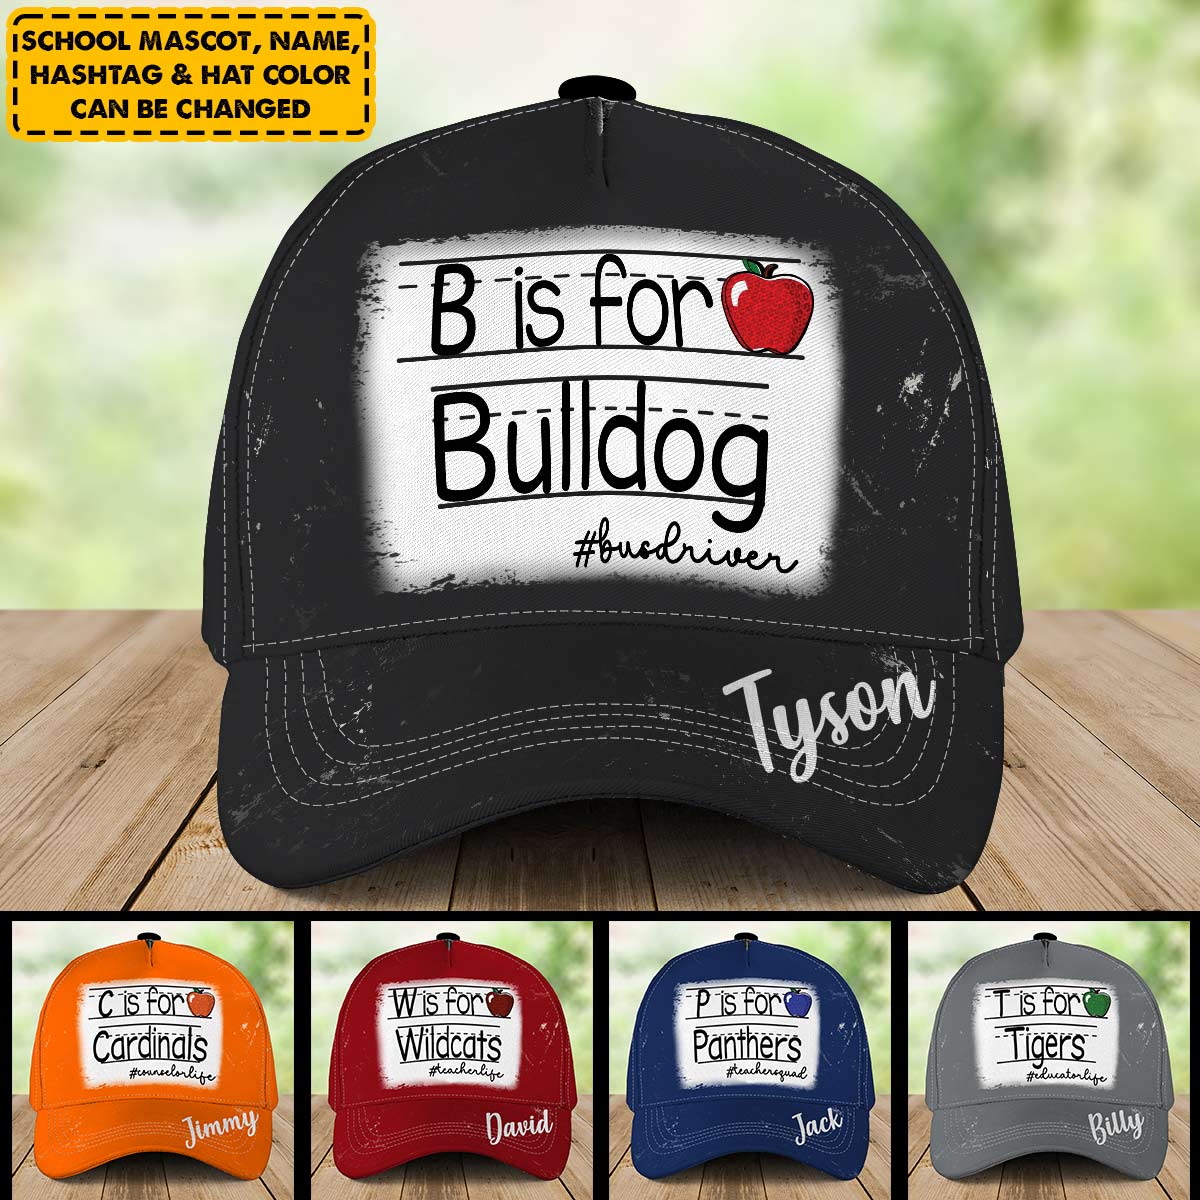 Personalized Cap For Teacher Student - Custom School Mascot Hat With Name